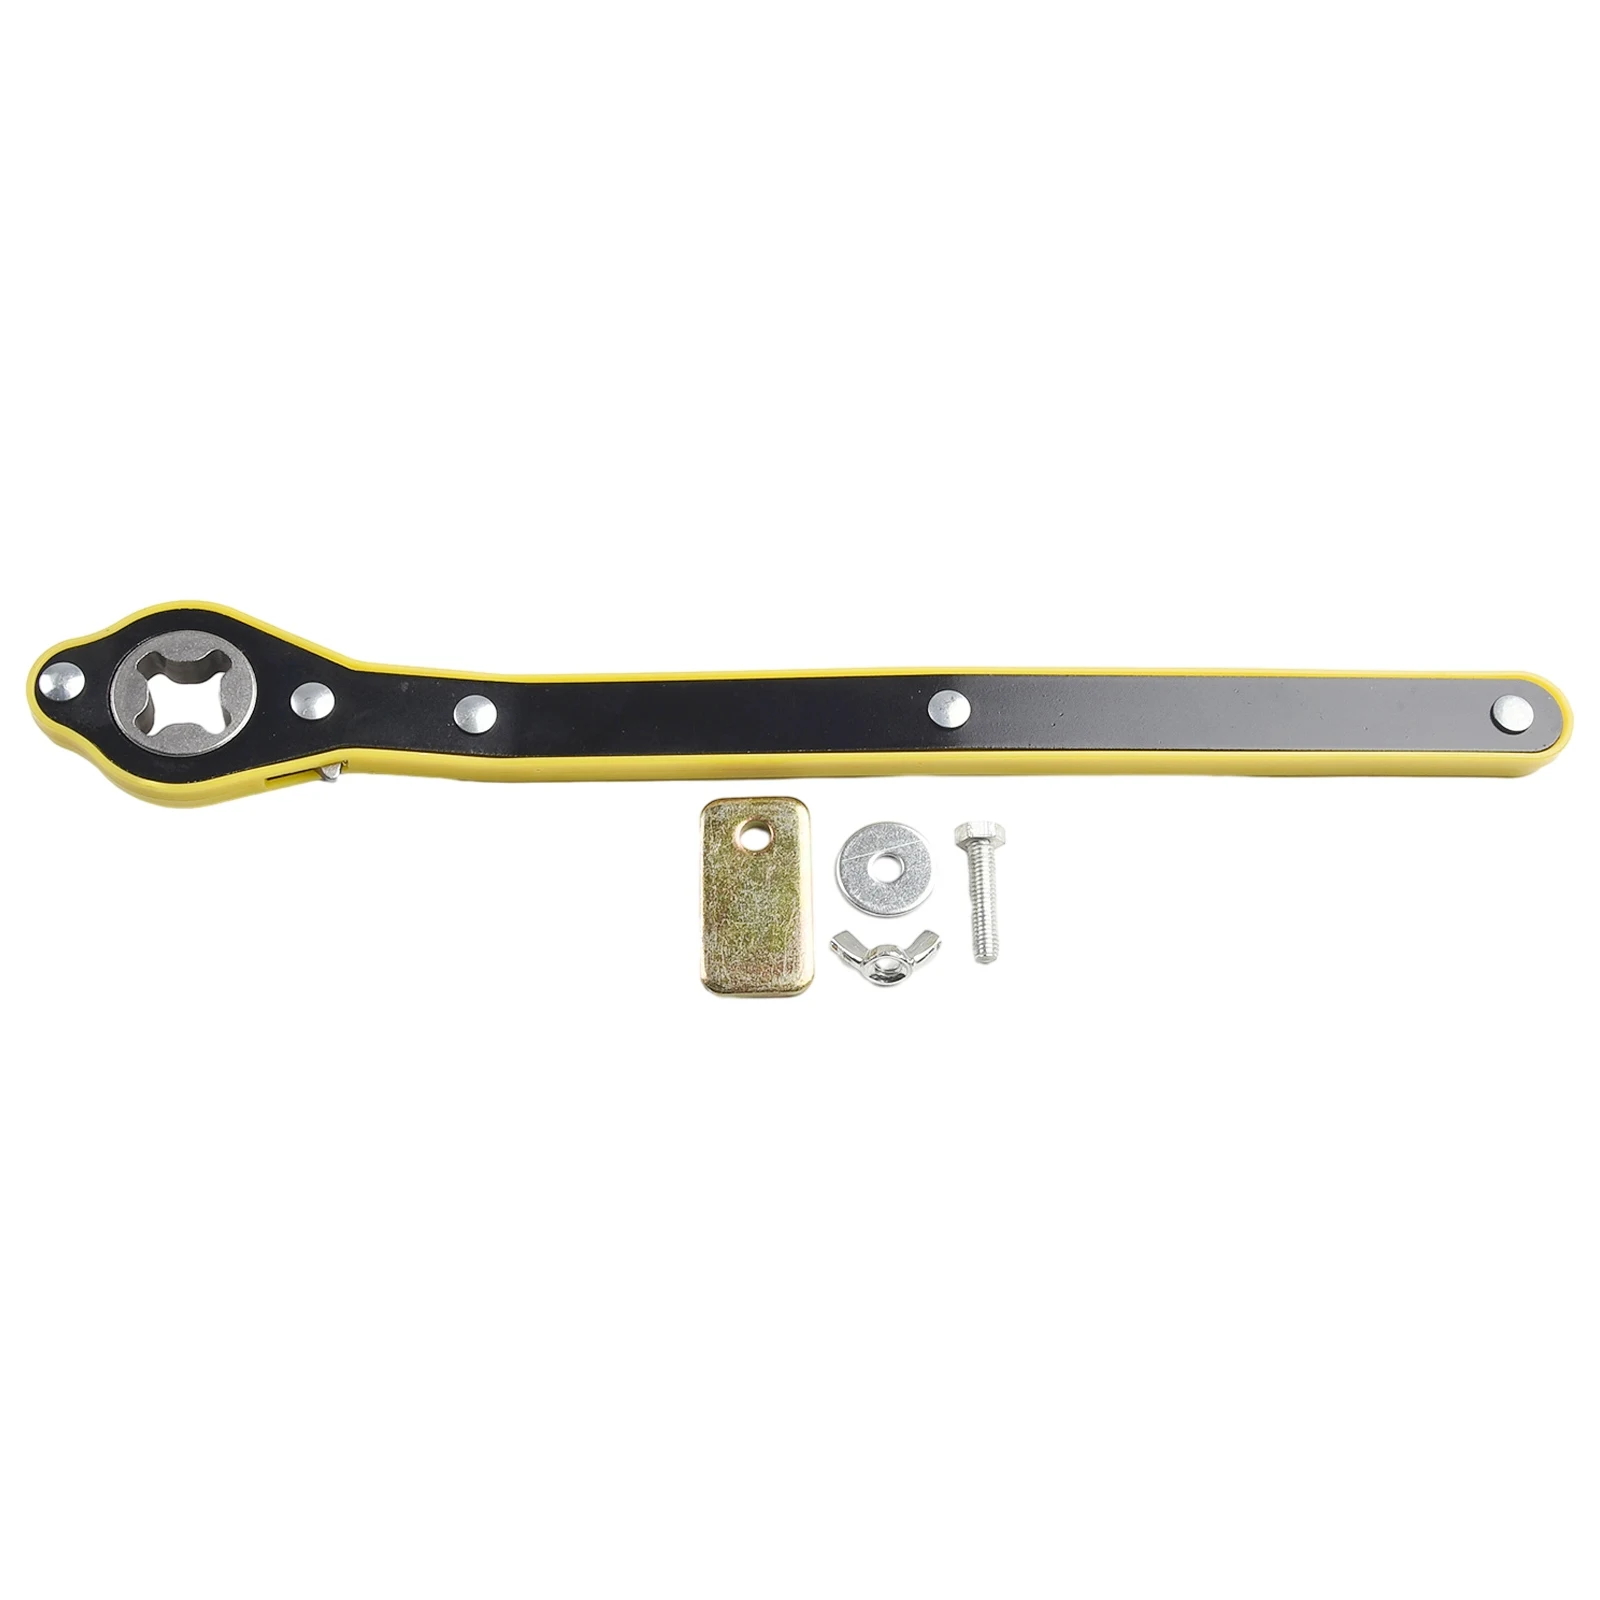 Adapter Car Wrench Perfect For Travel Use Rust Resistant Simple Design Durable Construction Easy To Use Car Accessories